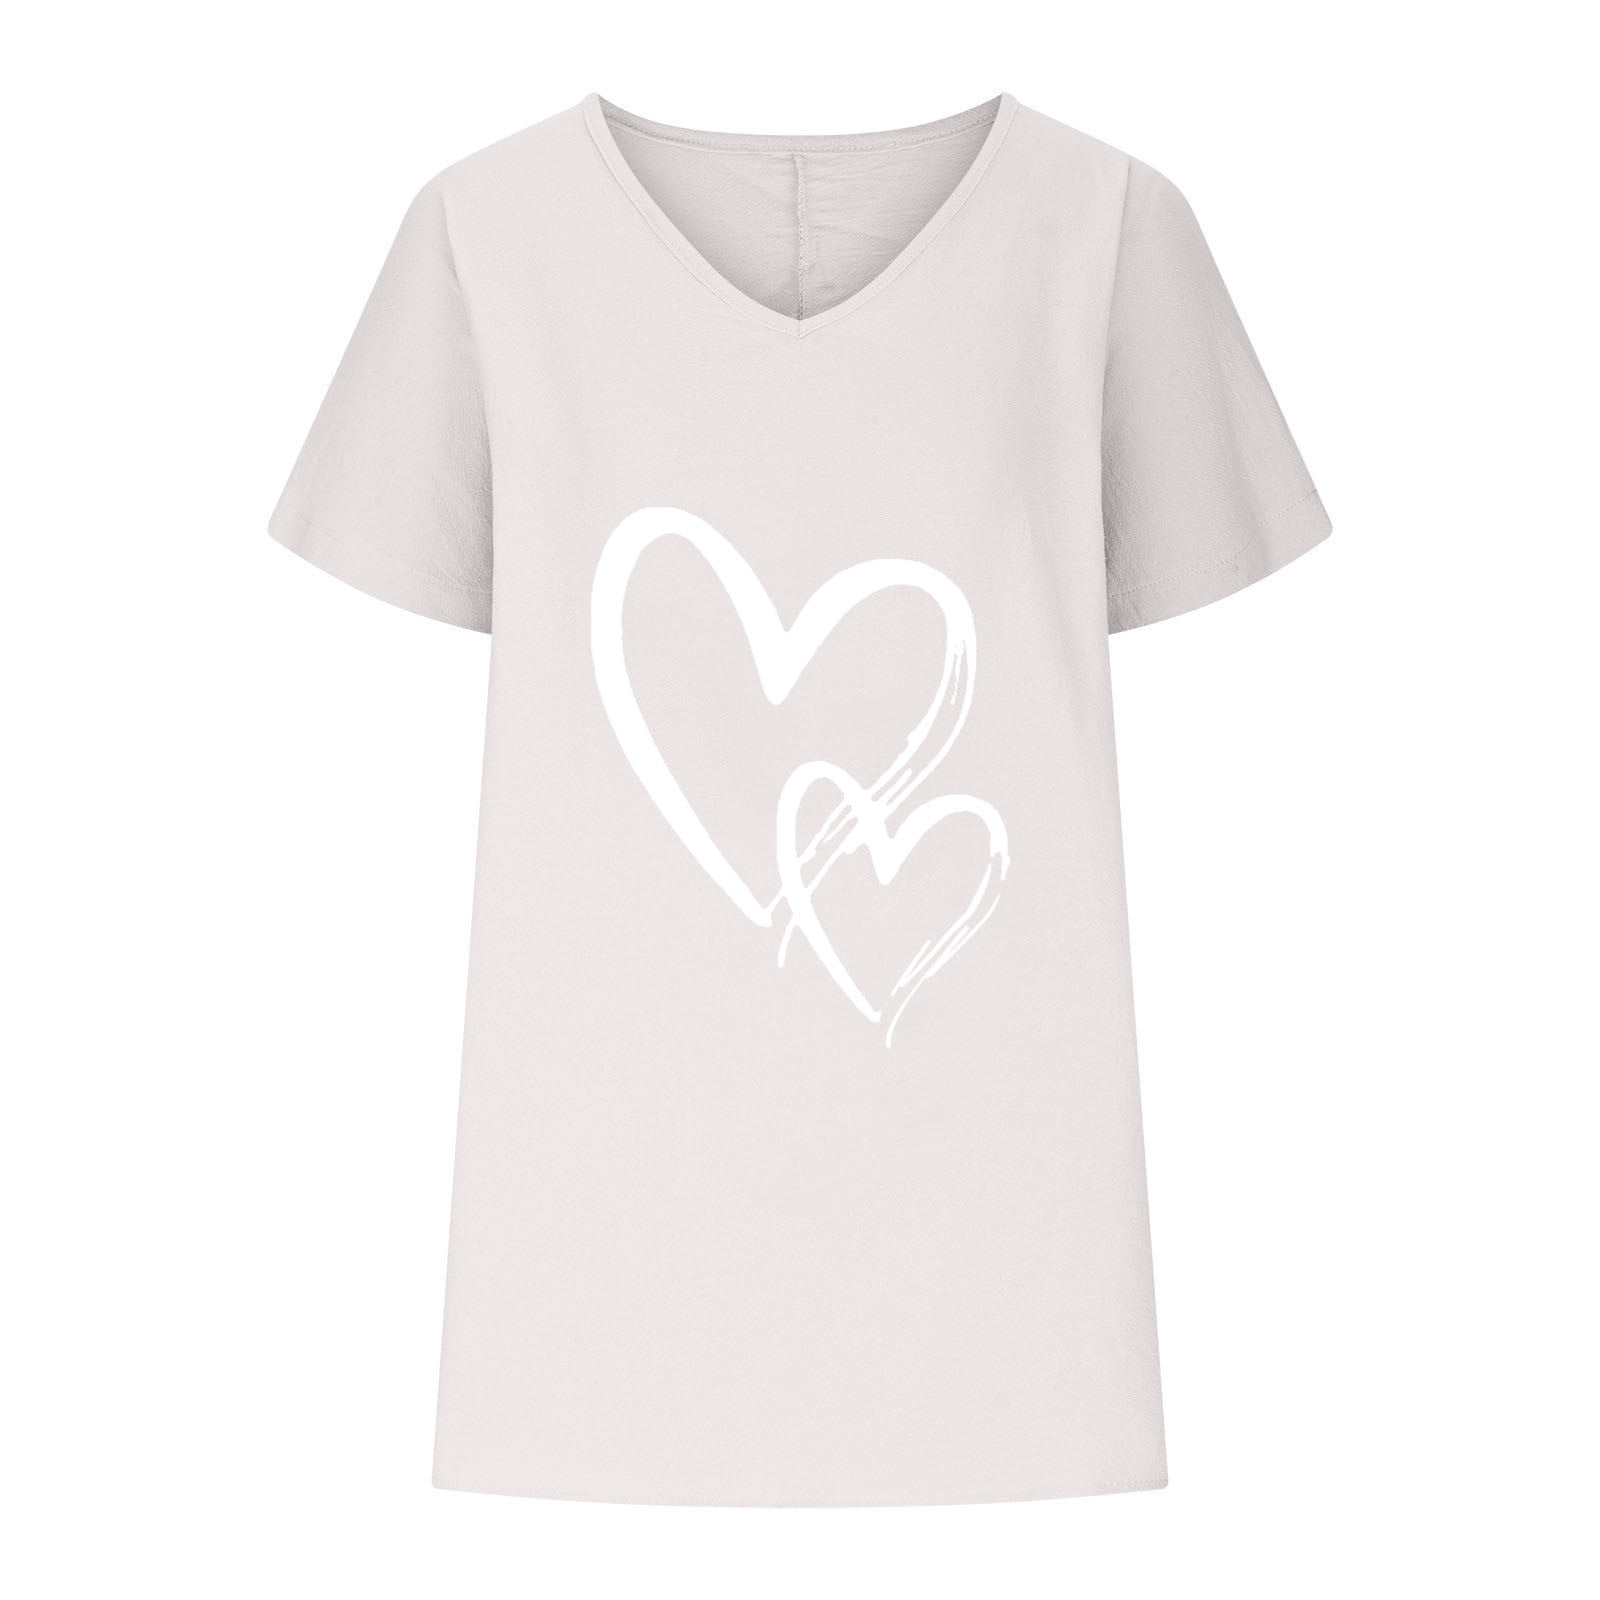 Heart Olyvenn Plus Black Tees Blouse 2023 Love Trendy Summer Sleeve Neck Linen Fit Relaxed Tops Shirts Size Cotton Workout Comfy - 12 V Flowy Womens Casual Womens Print Clothing T-Shirts Short